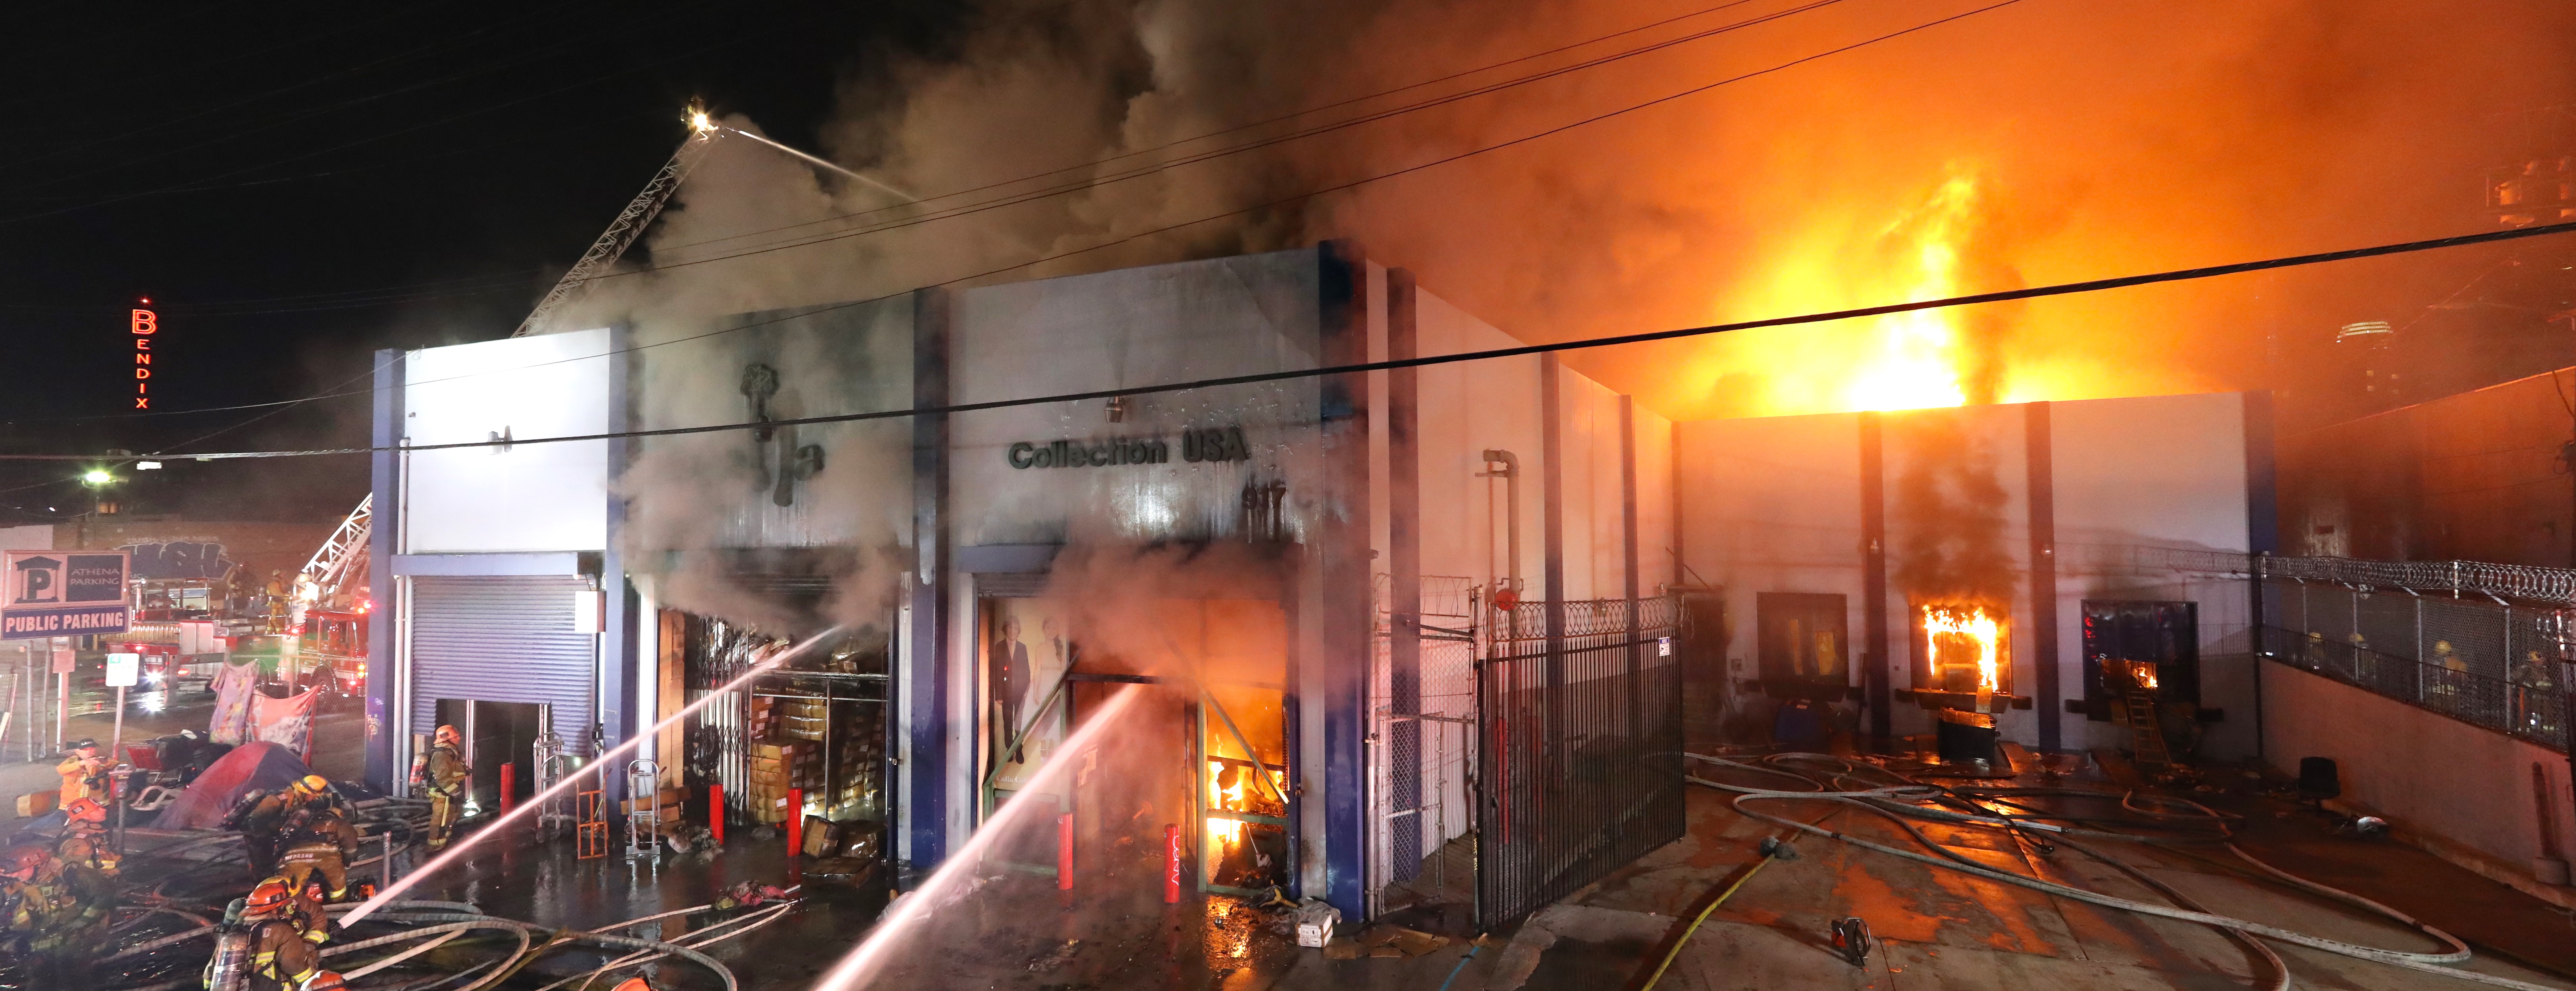 Large commercial building with fire showing an numerous fire engines with firefighters fighting the fire